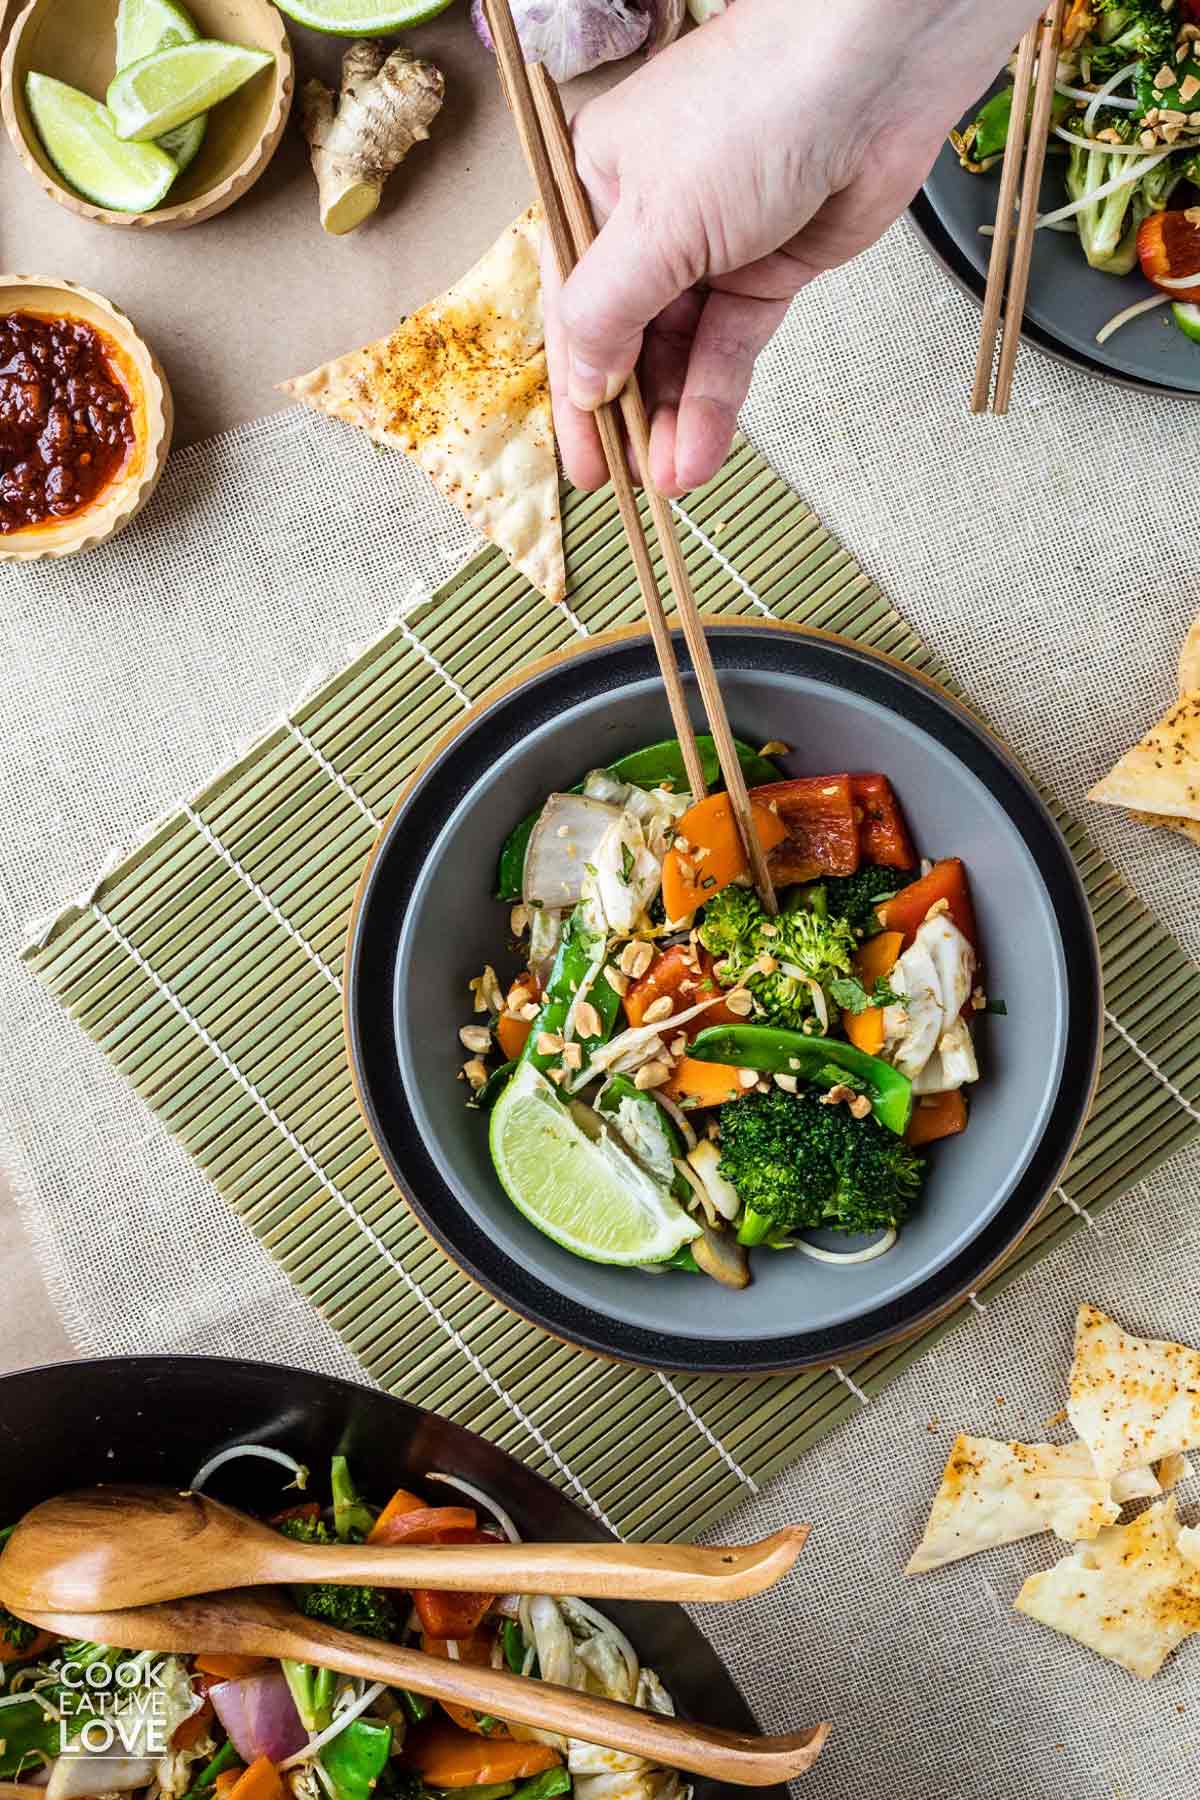 A bowl of spicy stir fry on the table with a hand holding chopsticks reaching in for a bite.